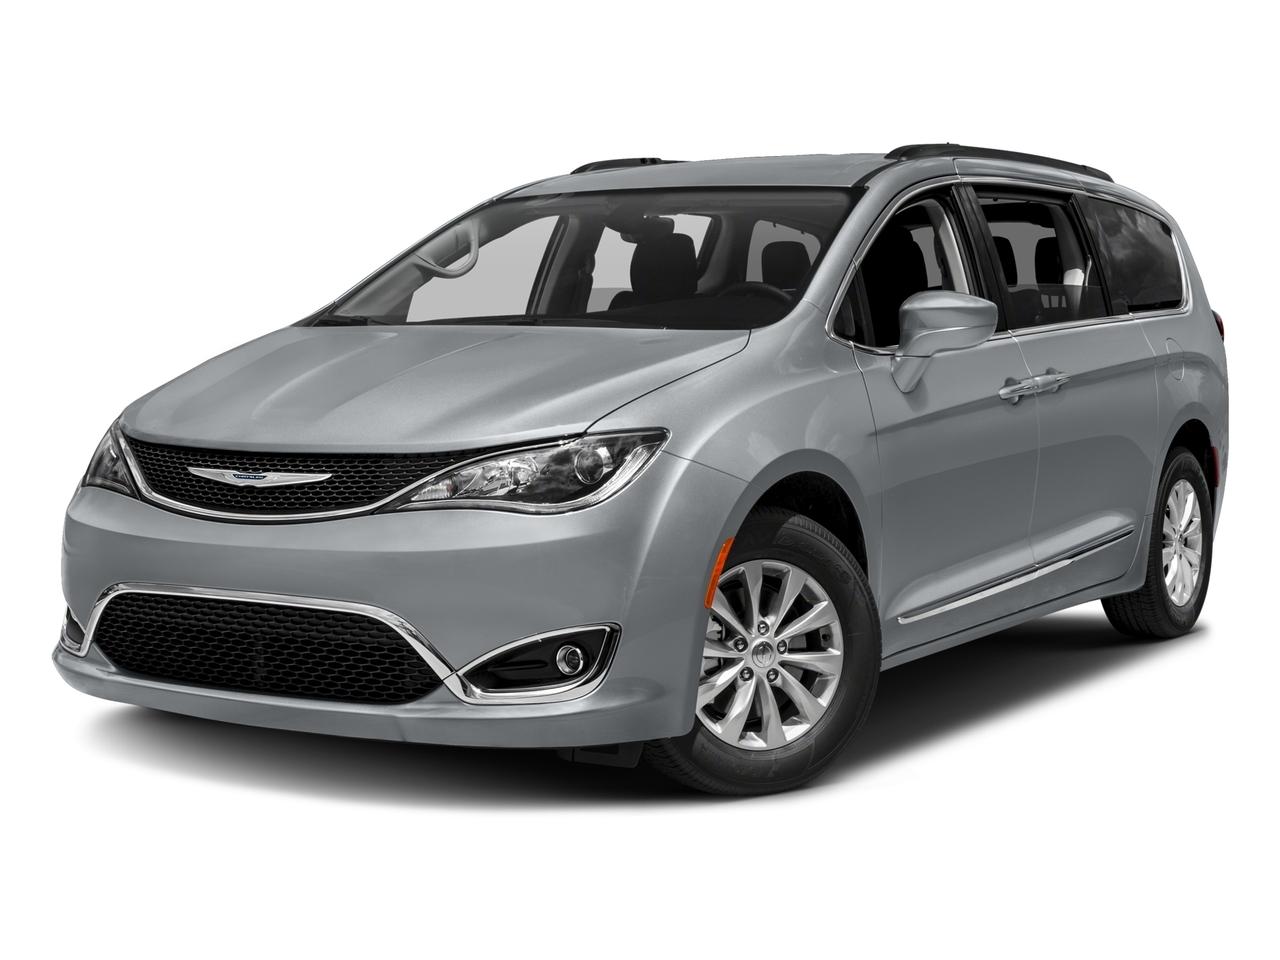 2017 Chrysler Pacifica Vehicle Photo in PORTLAND, OR 97225-3518